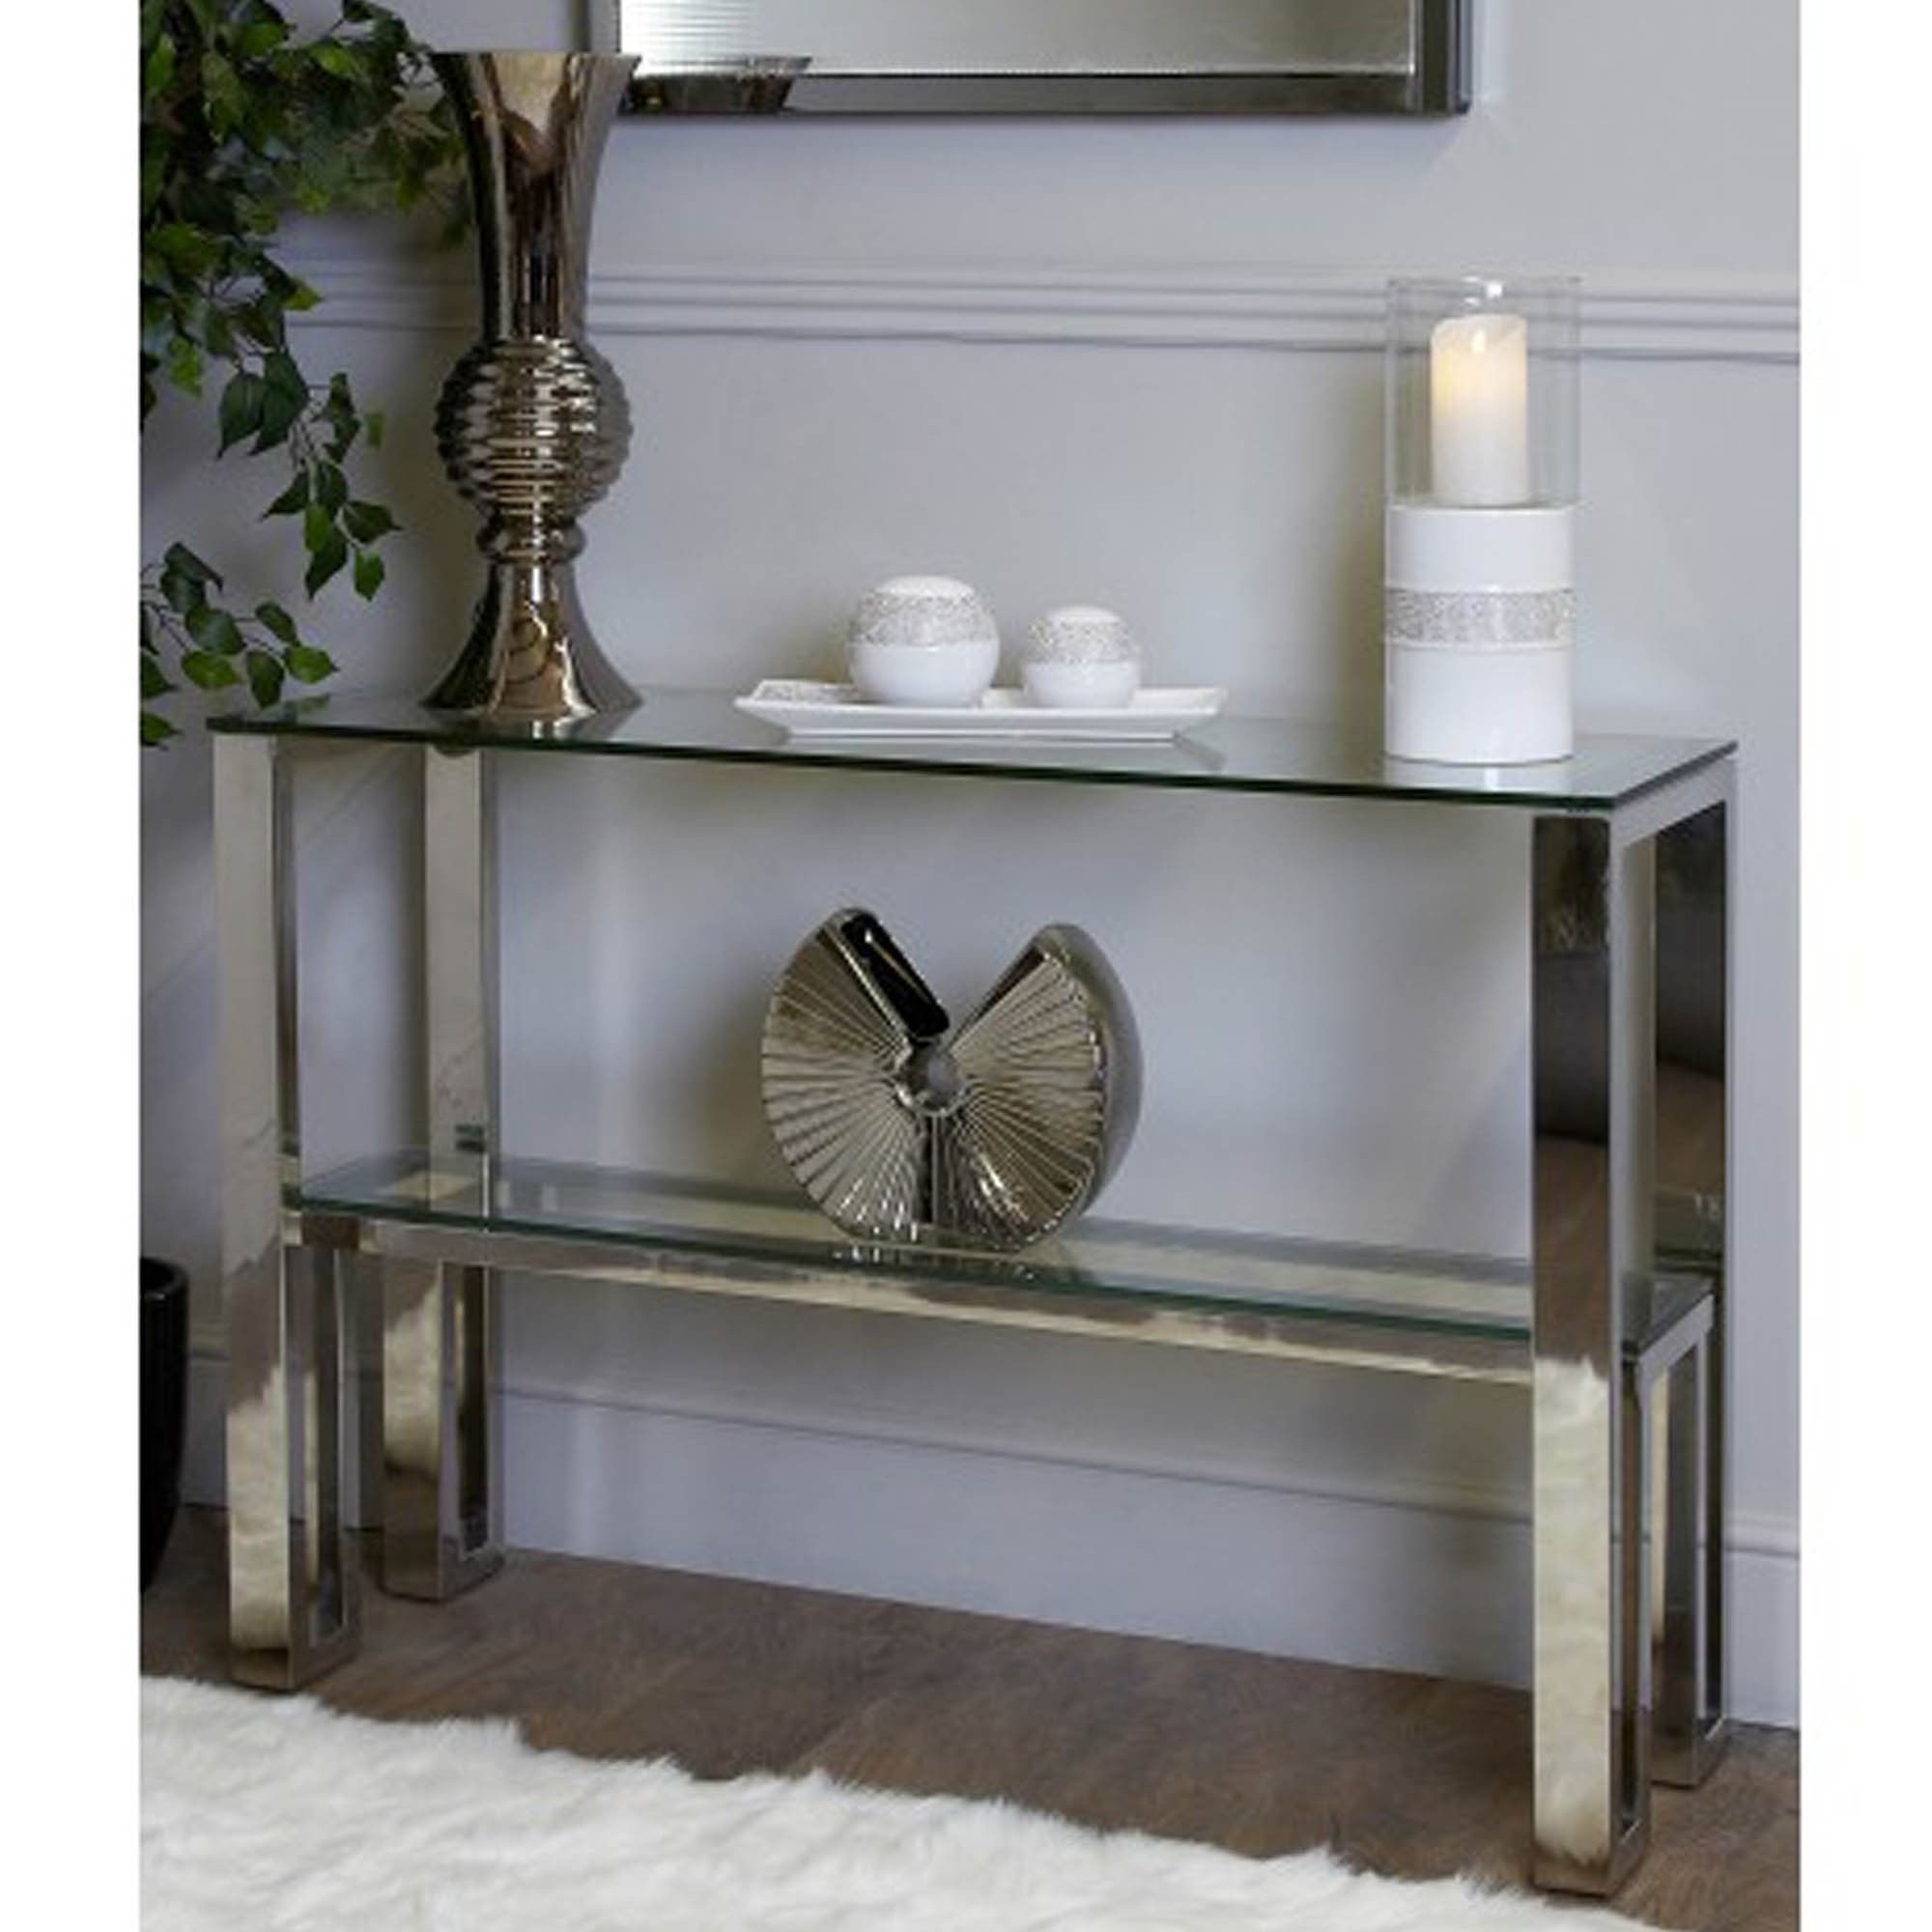 Ollie Chrome Console Table | Modern & Contemporary | Console Tables Throughout Chrome Console Tables (View 4 of 20)